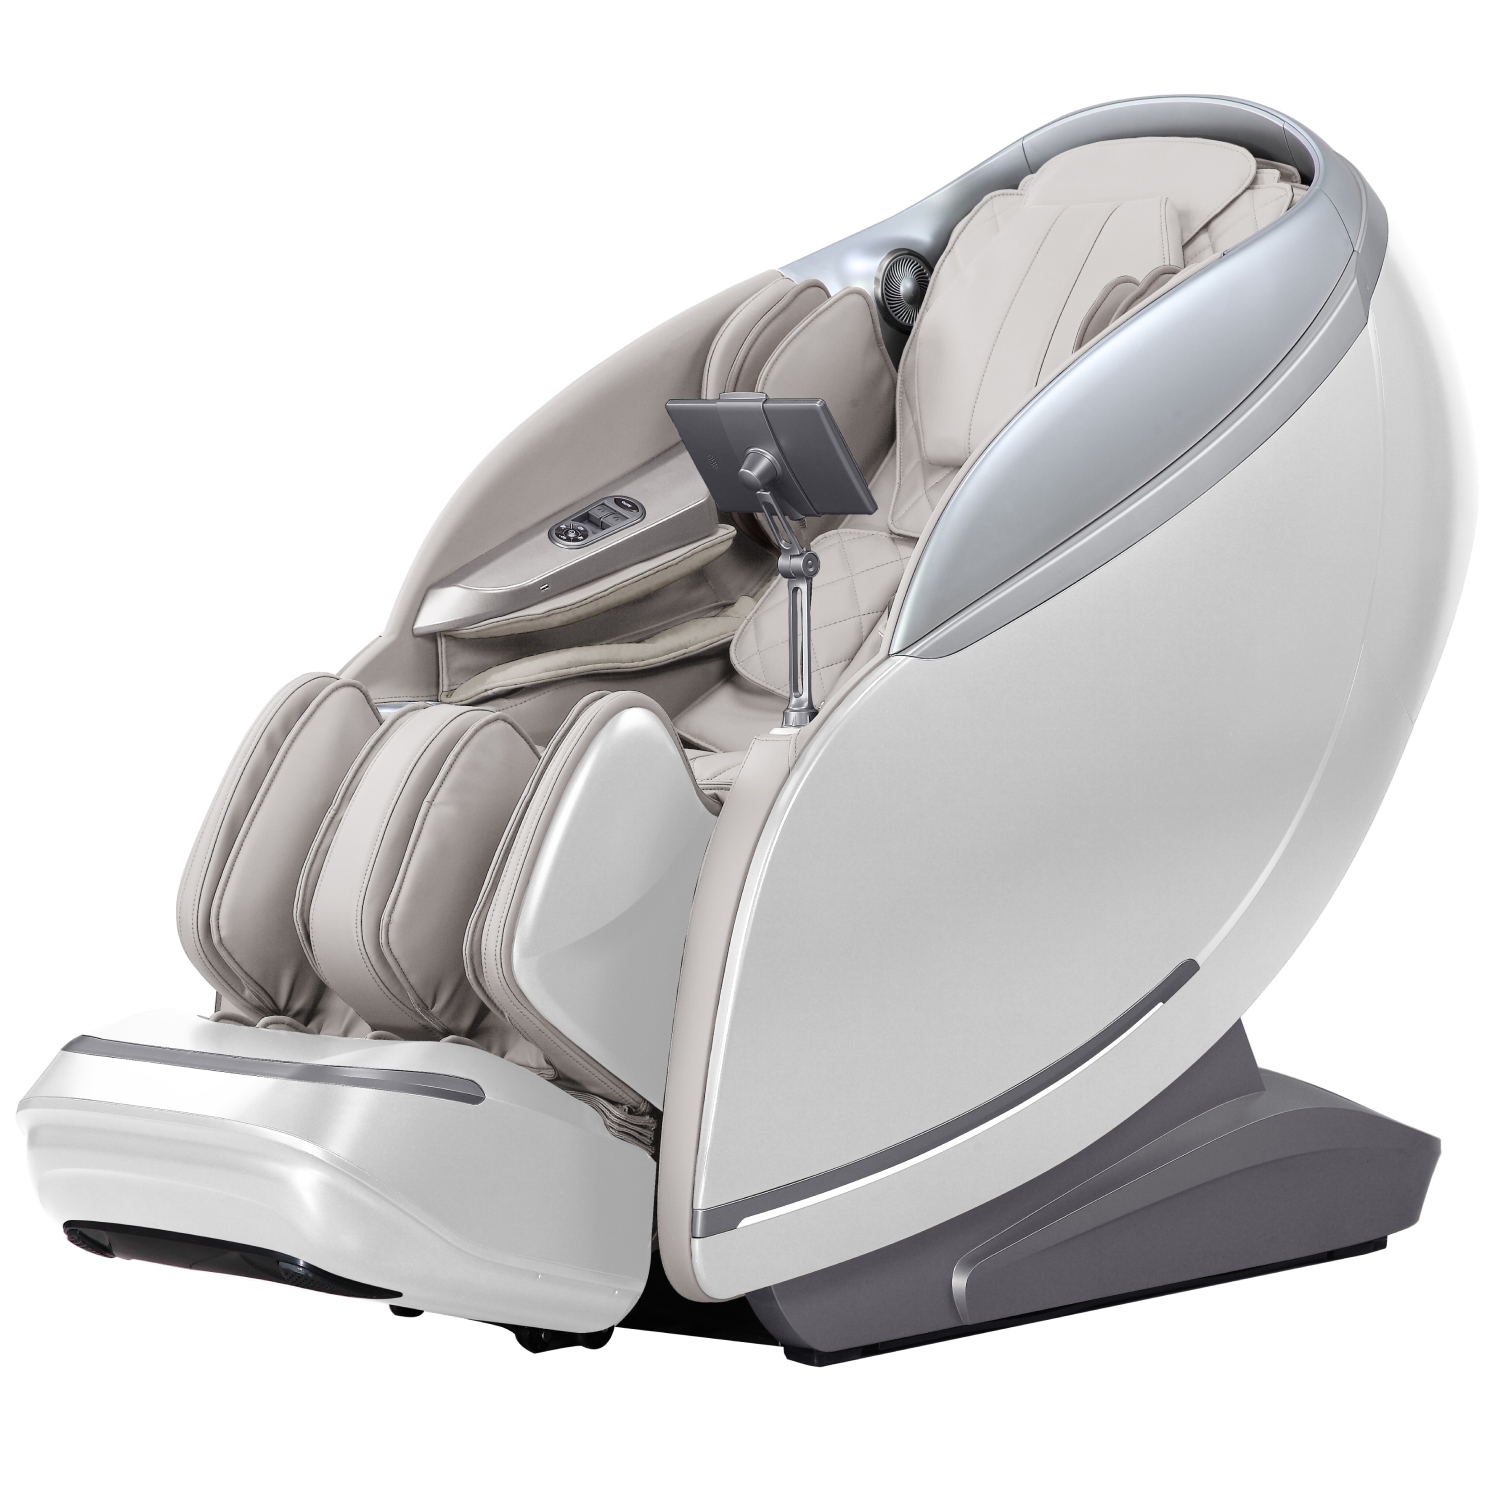 The brand new THERAPEUTIX 4D Massage Chair BEIGE